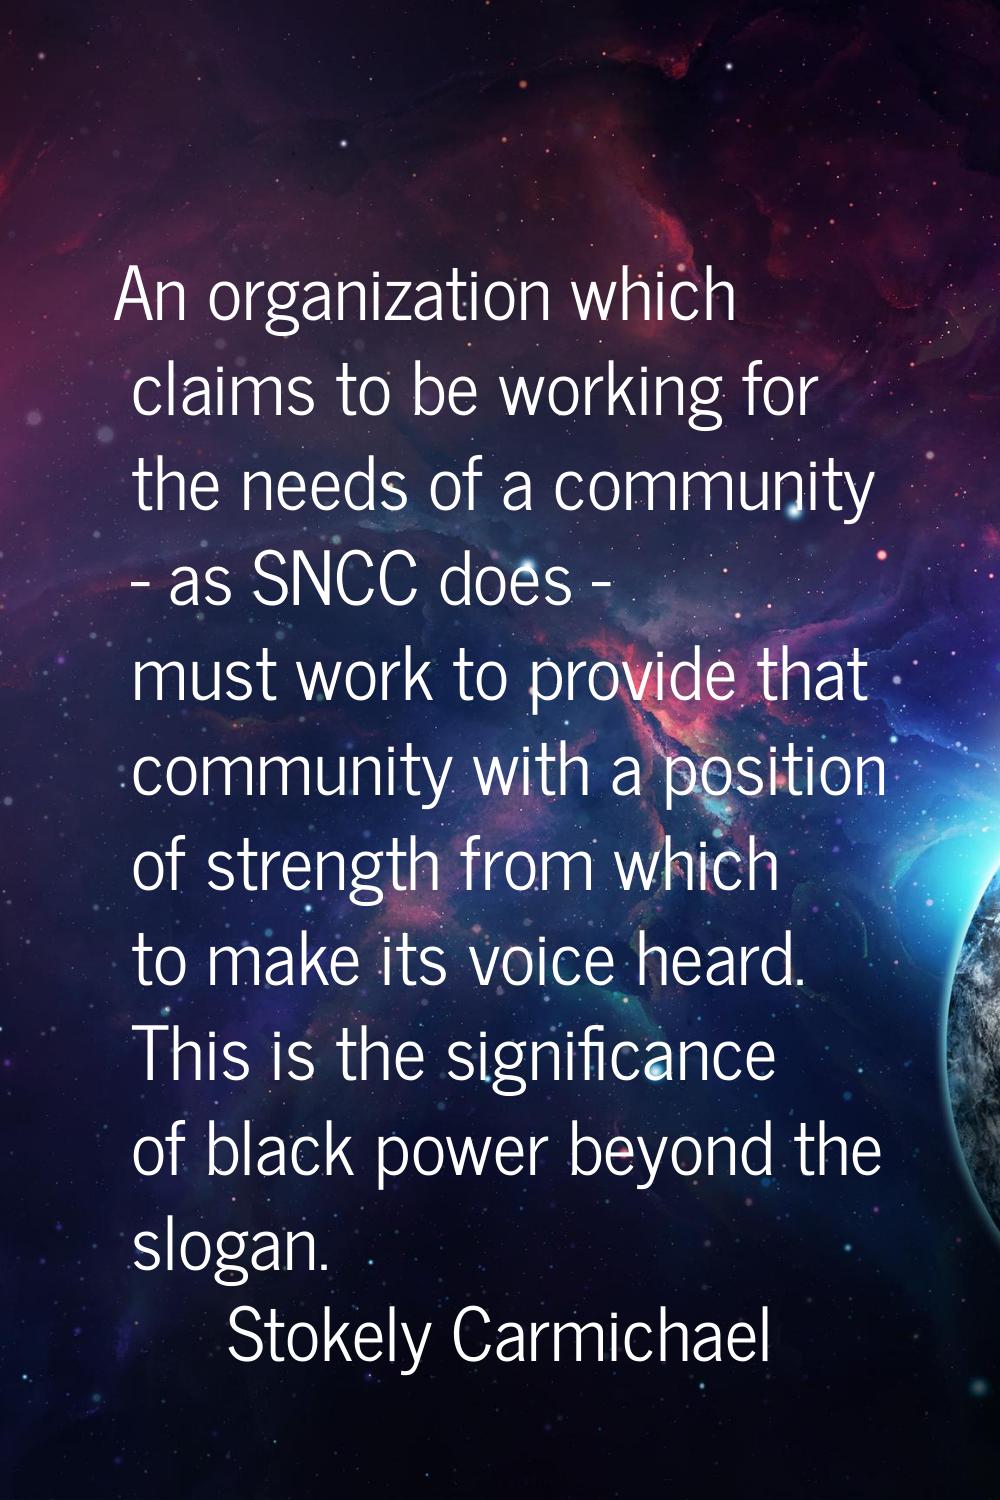 An organization which claims to be working for the needs of a community - as SNCC does - must work 